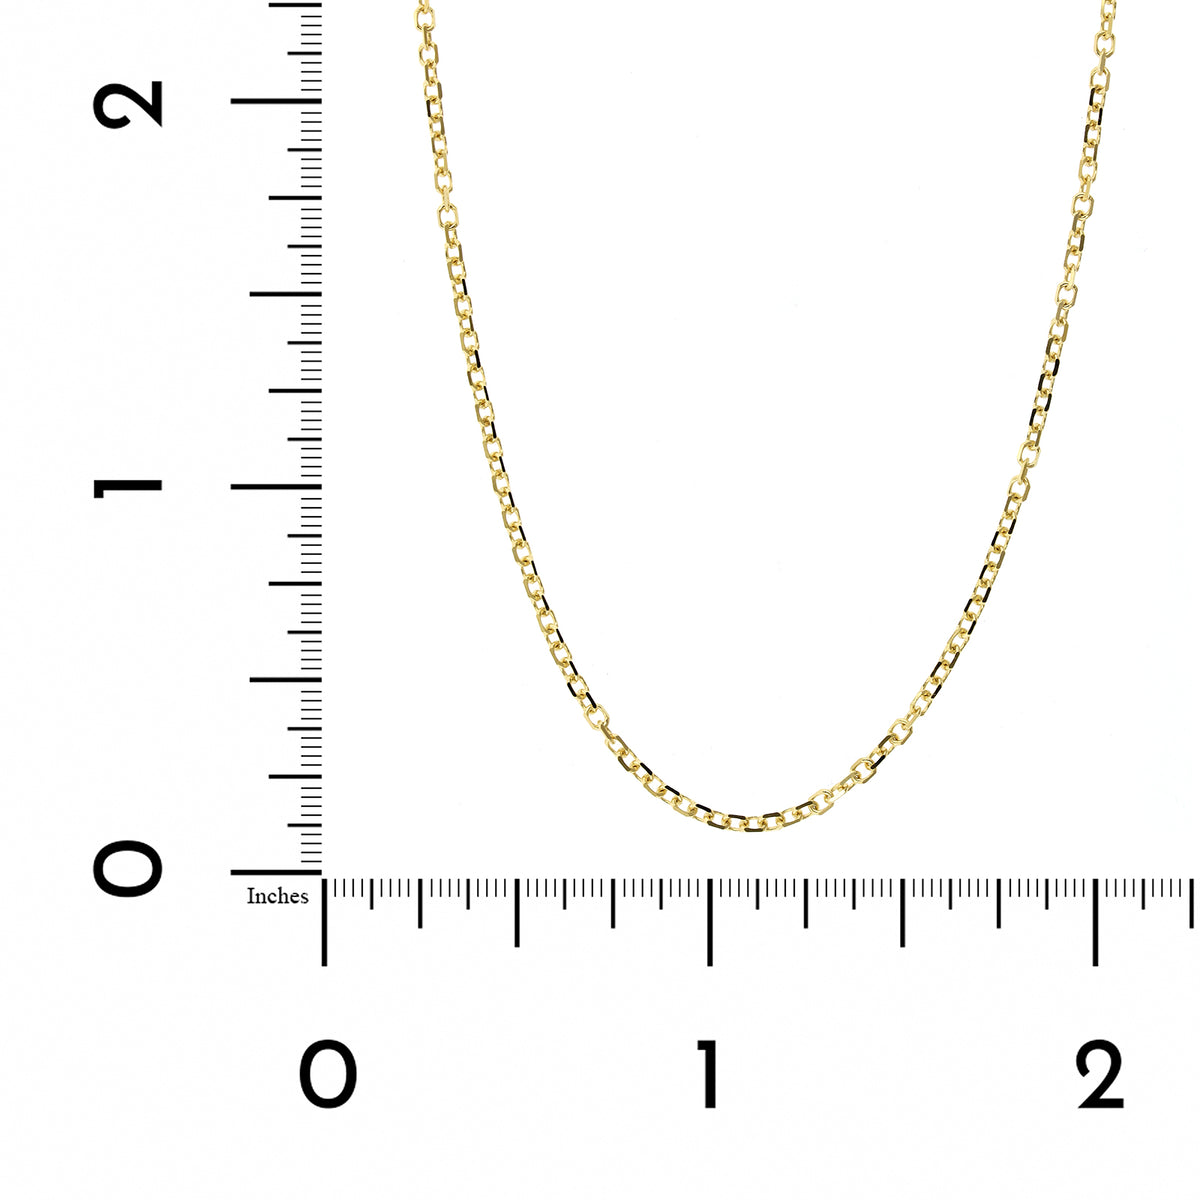 14K Yellow Gold Diamond Cut Cable Chain